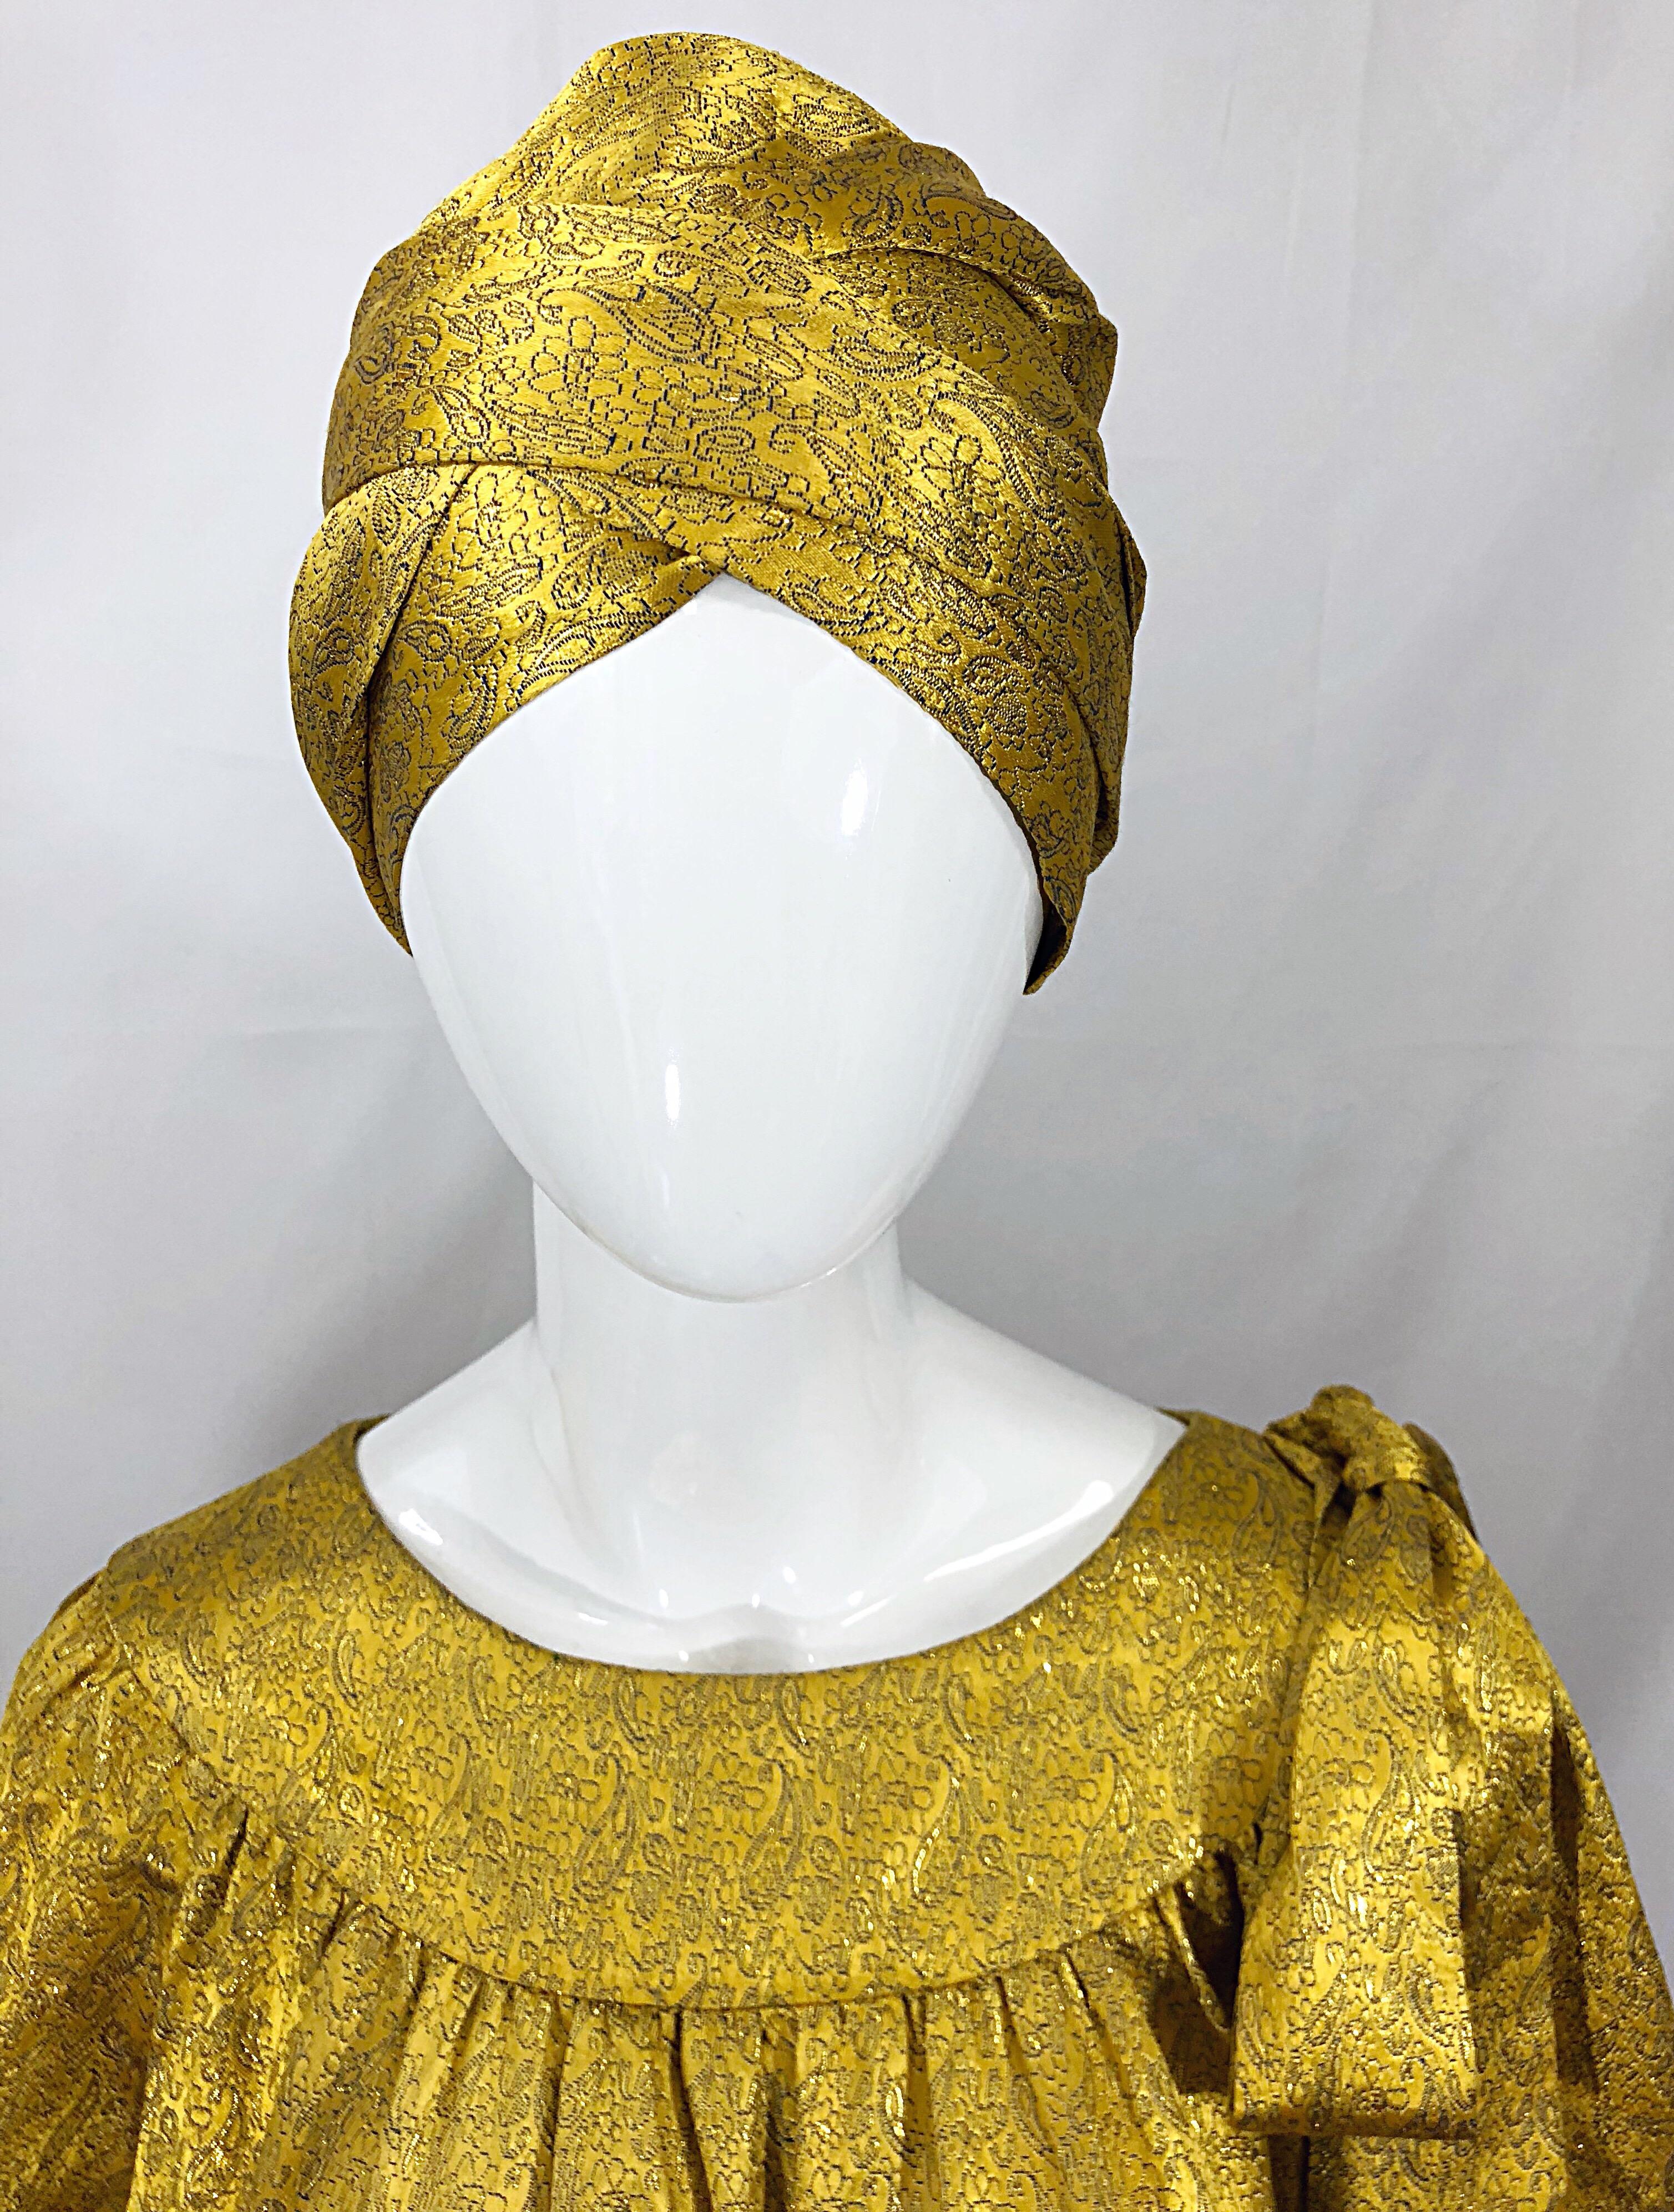 Incredible vintage BRIONI Couture 20s flapper style yellow and gold silk drop waist dress and turban caftan sash! Luxurious Italian silk fabric drapes the body beautifully. Loose fitting bodice with an elastic waistband that can be worn up on the